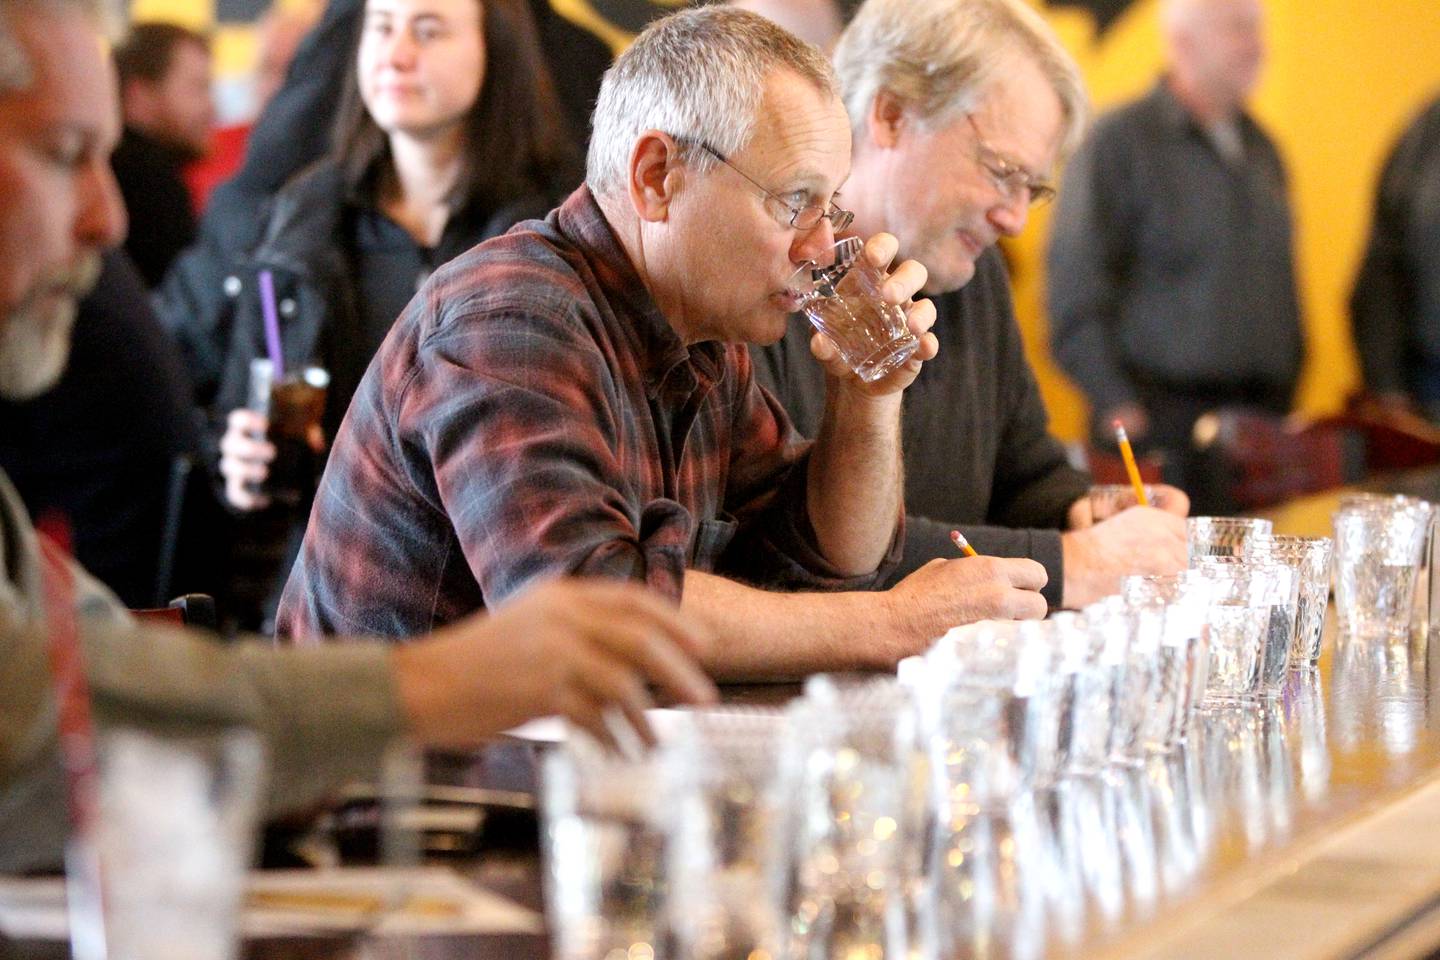 Dan Mann, retired from the Village of South Elgin, tastes water from various villages and cities throughout Kane County during the annual Kane County Water Association Water Taste Test at Global Brew in St. Charles on Thursday, Dec. 15, 2022.